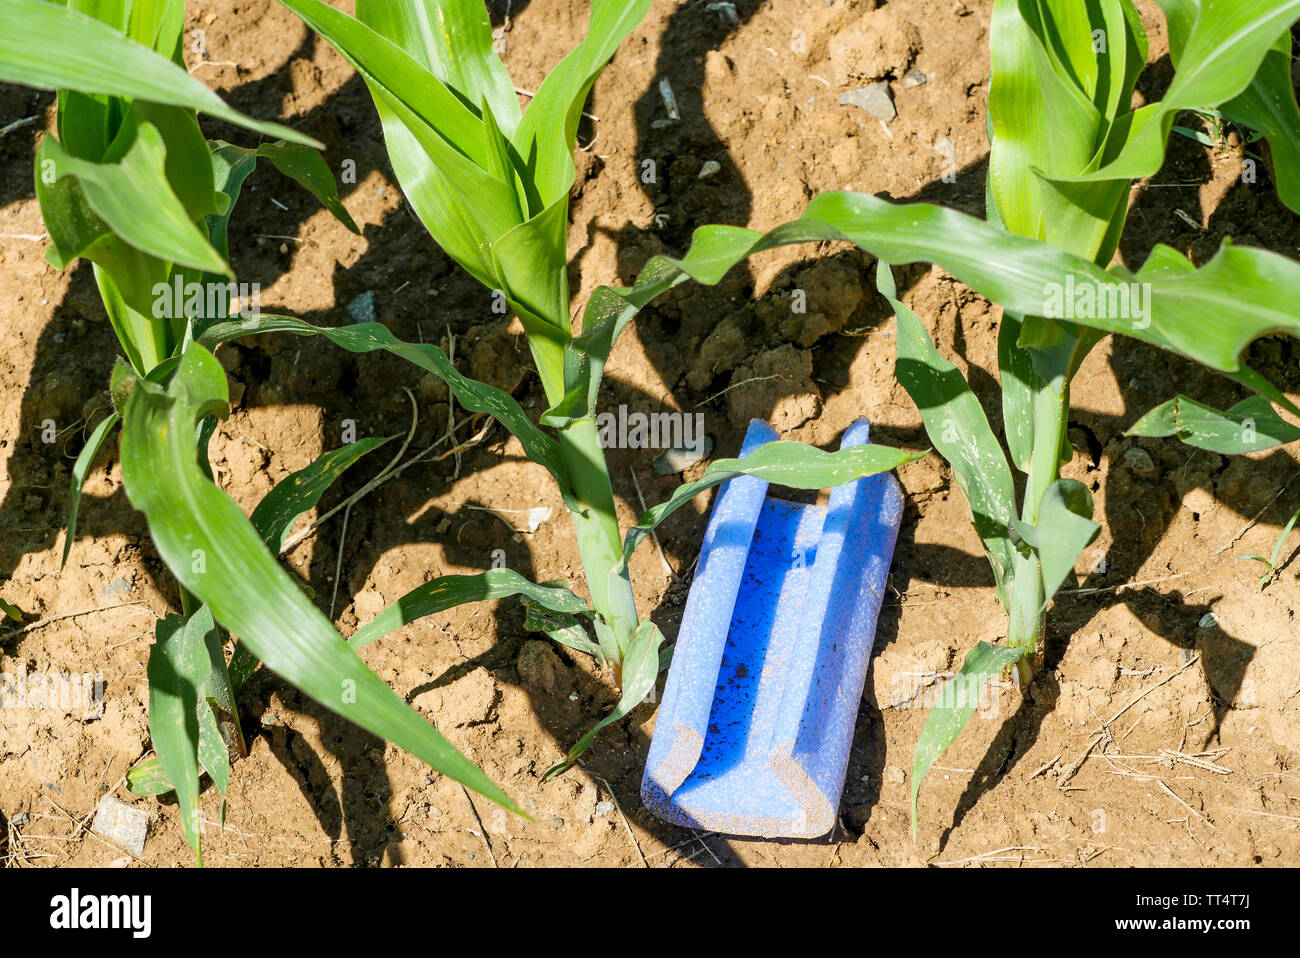 Pollution, a piece of plastic abandoned in a corn field, France Stock Photo